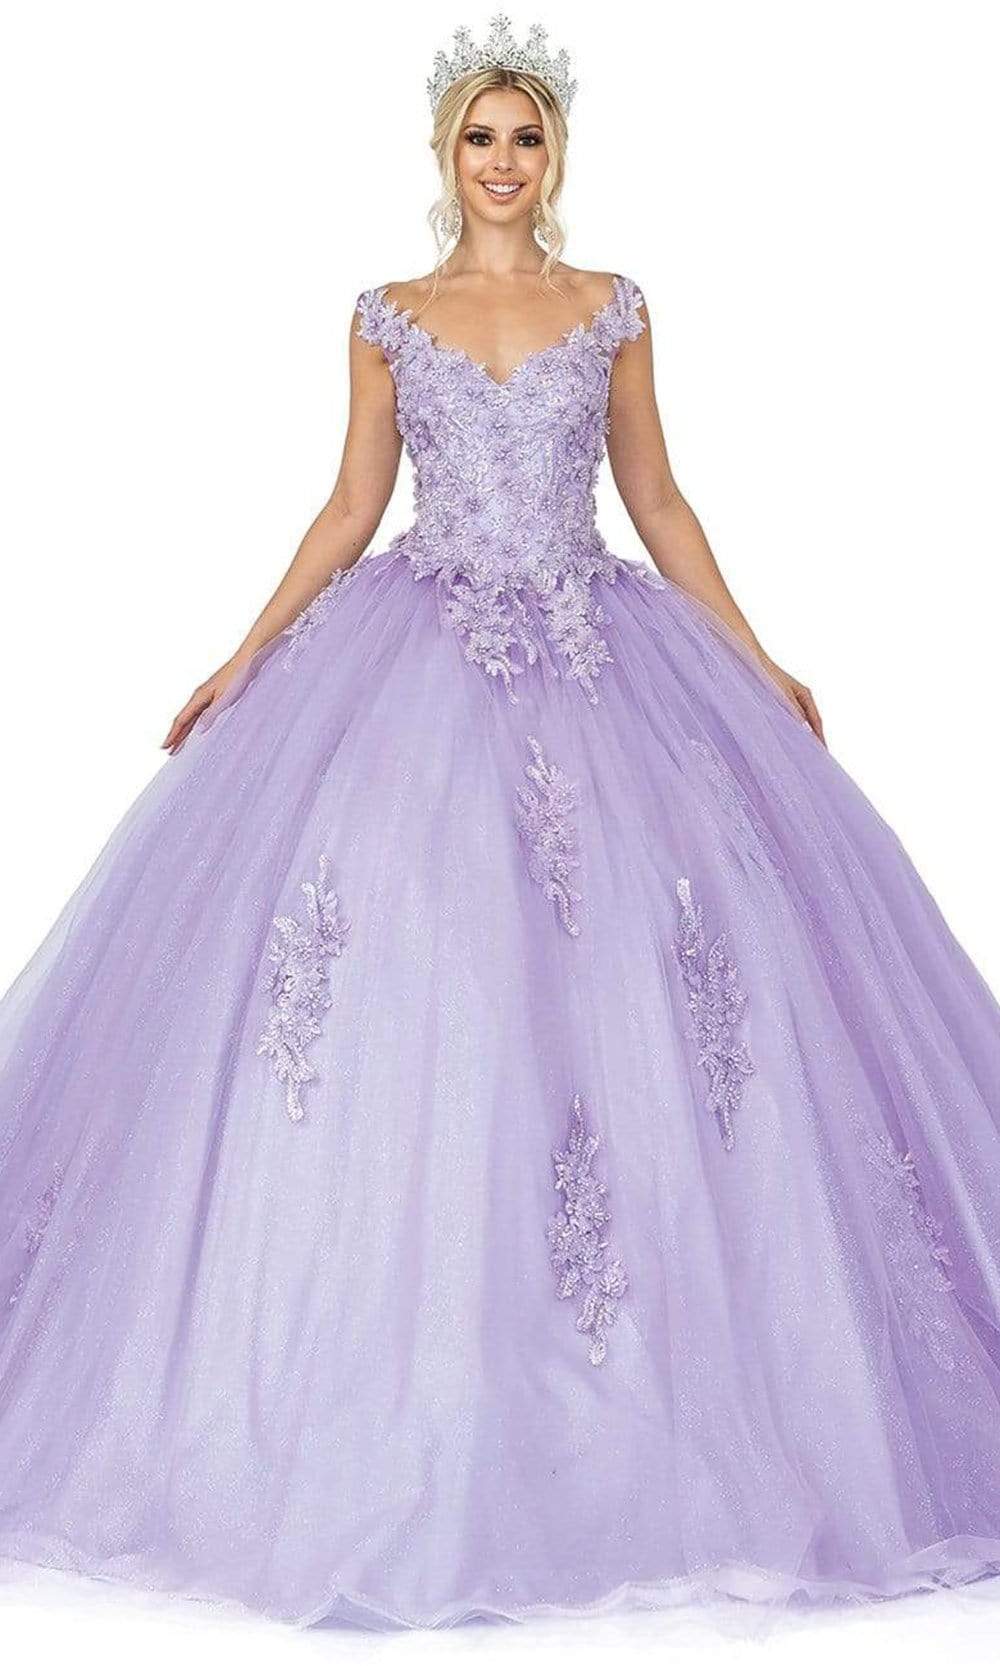 Dancing Queen - 1597 Beaded Floral Lace Applique Tulle Ballgown Quinceanera Dresses XS / Lilac